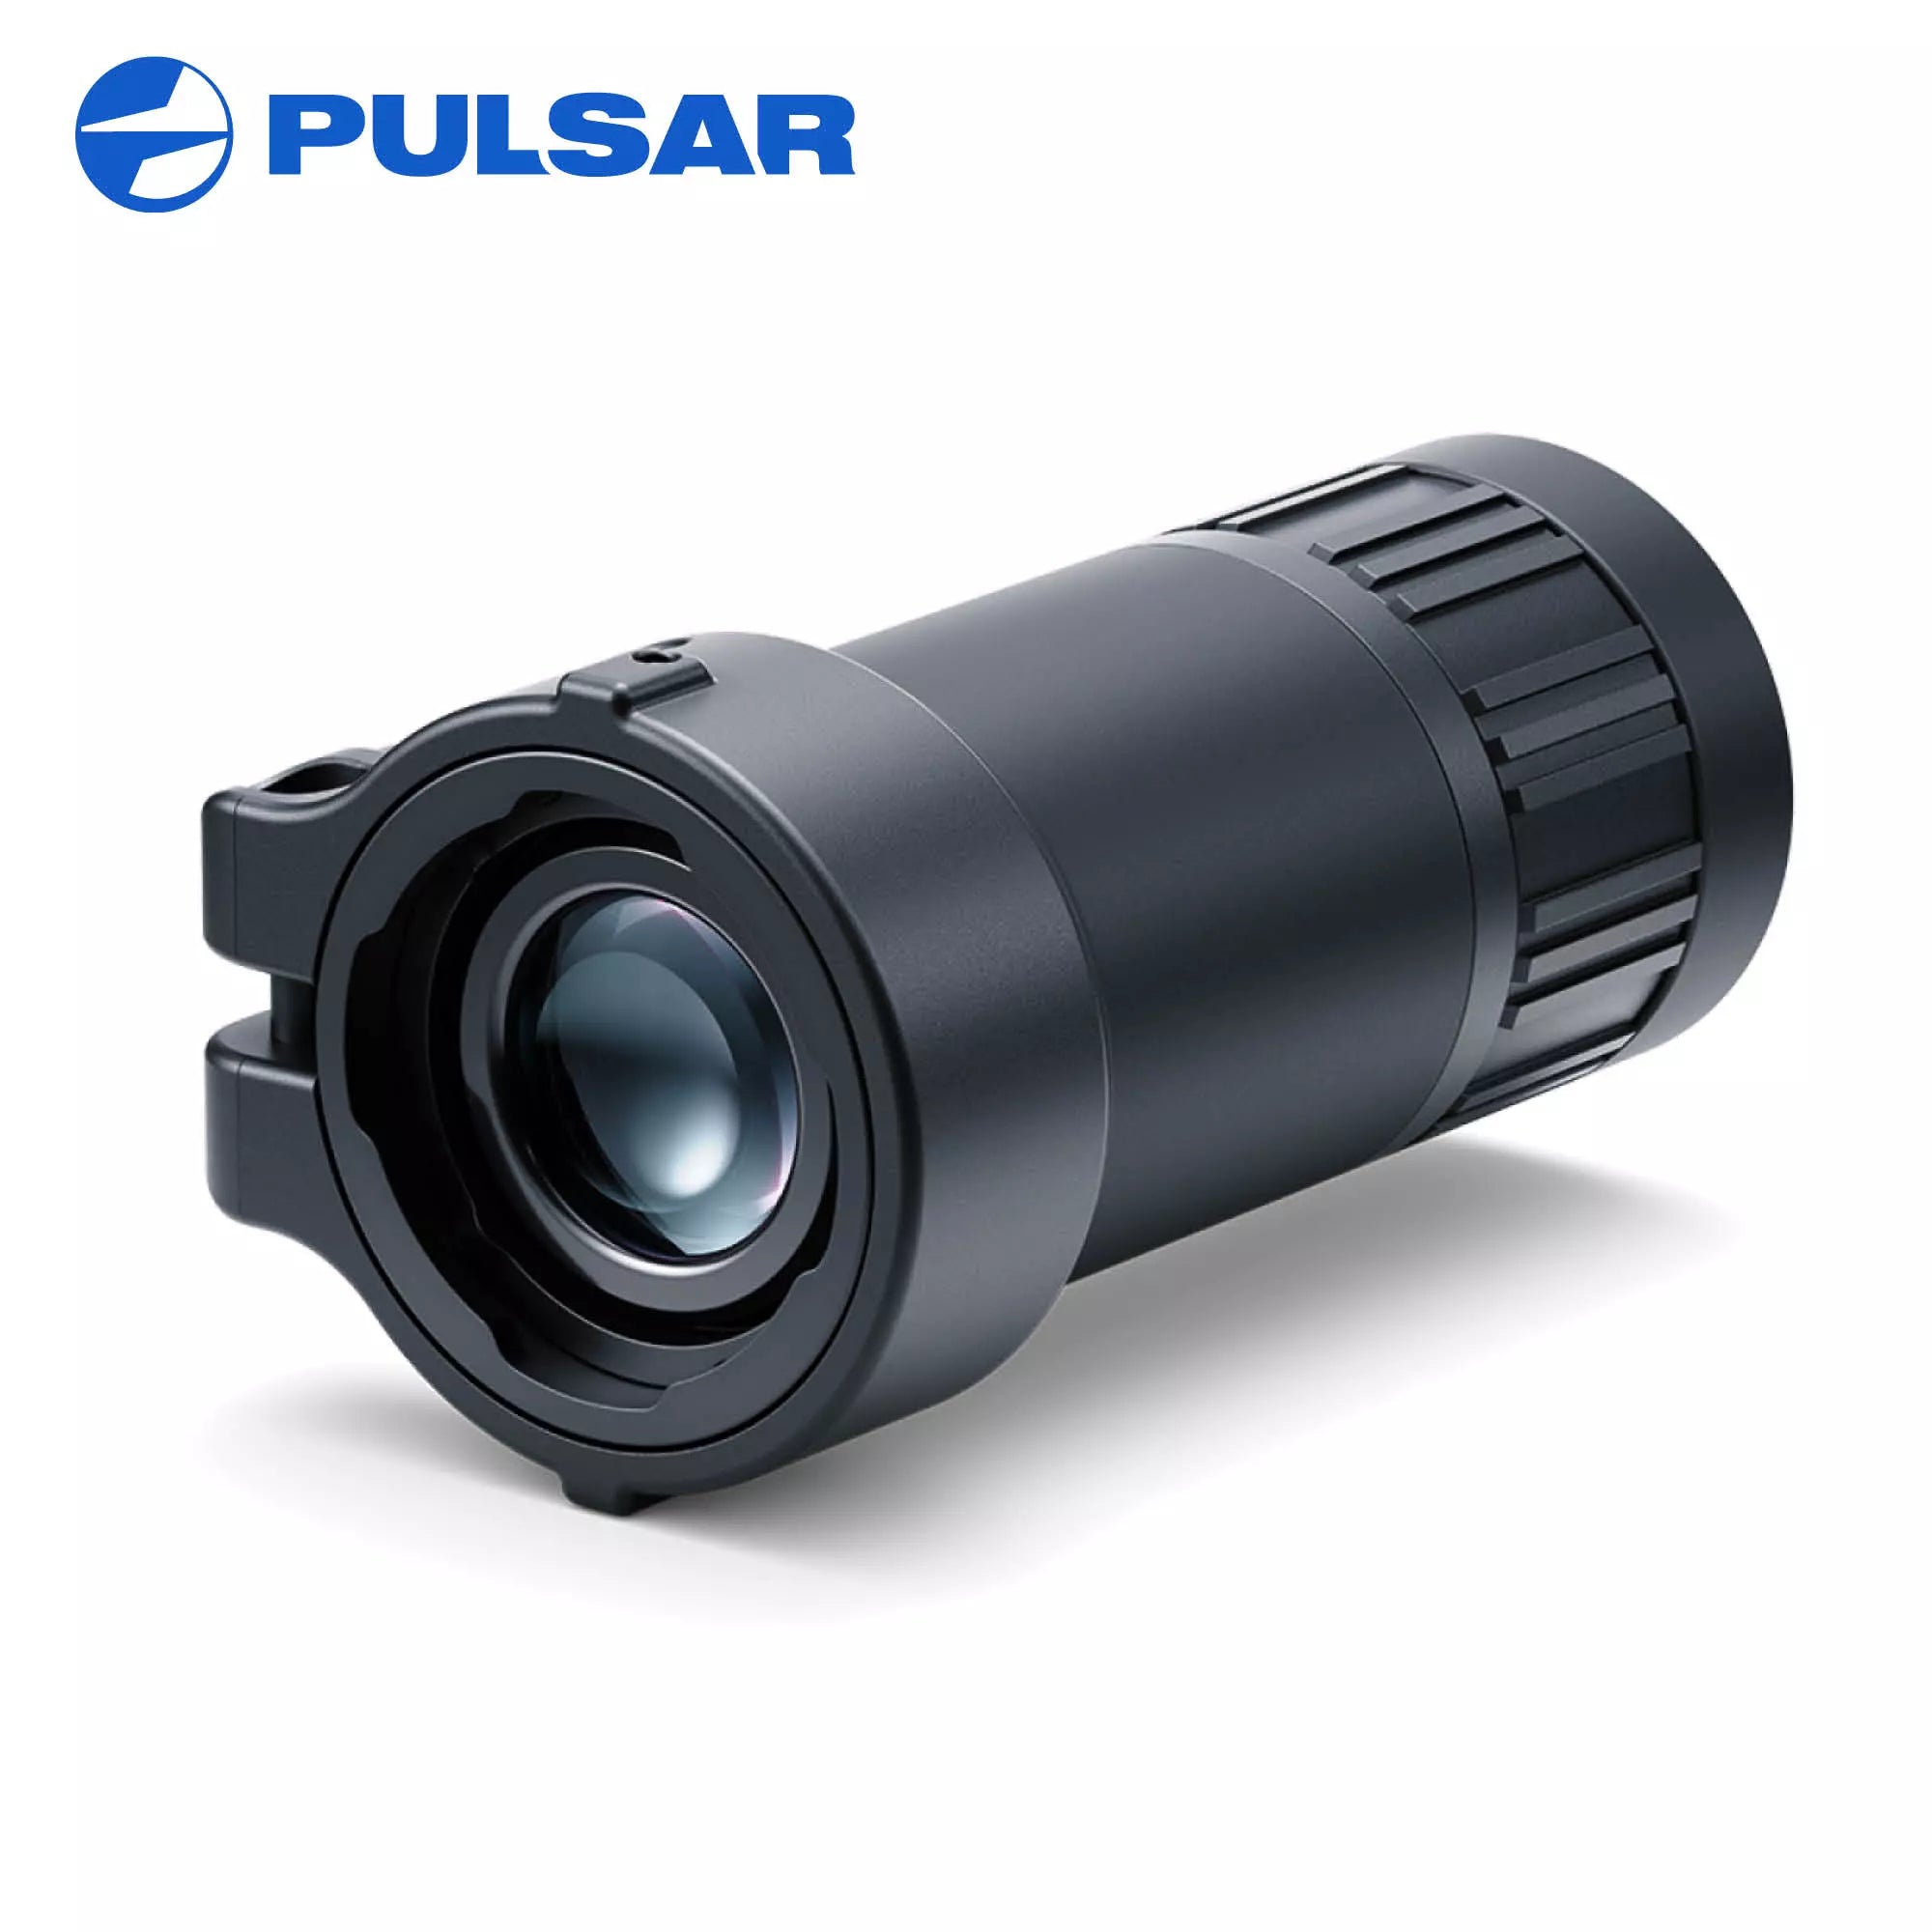 Pulsar 3x20 Monocular Adapter for Proton and Krypton thermal clip-on